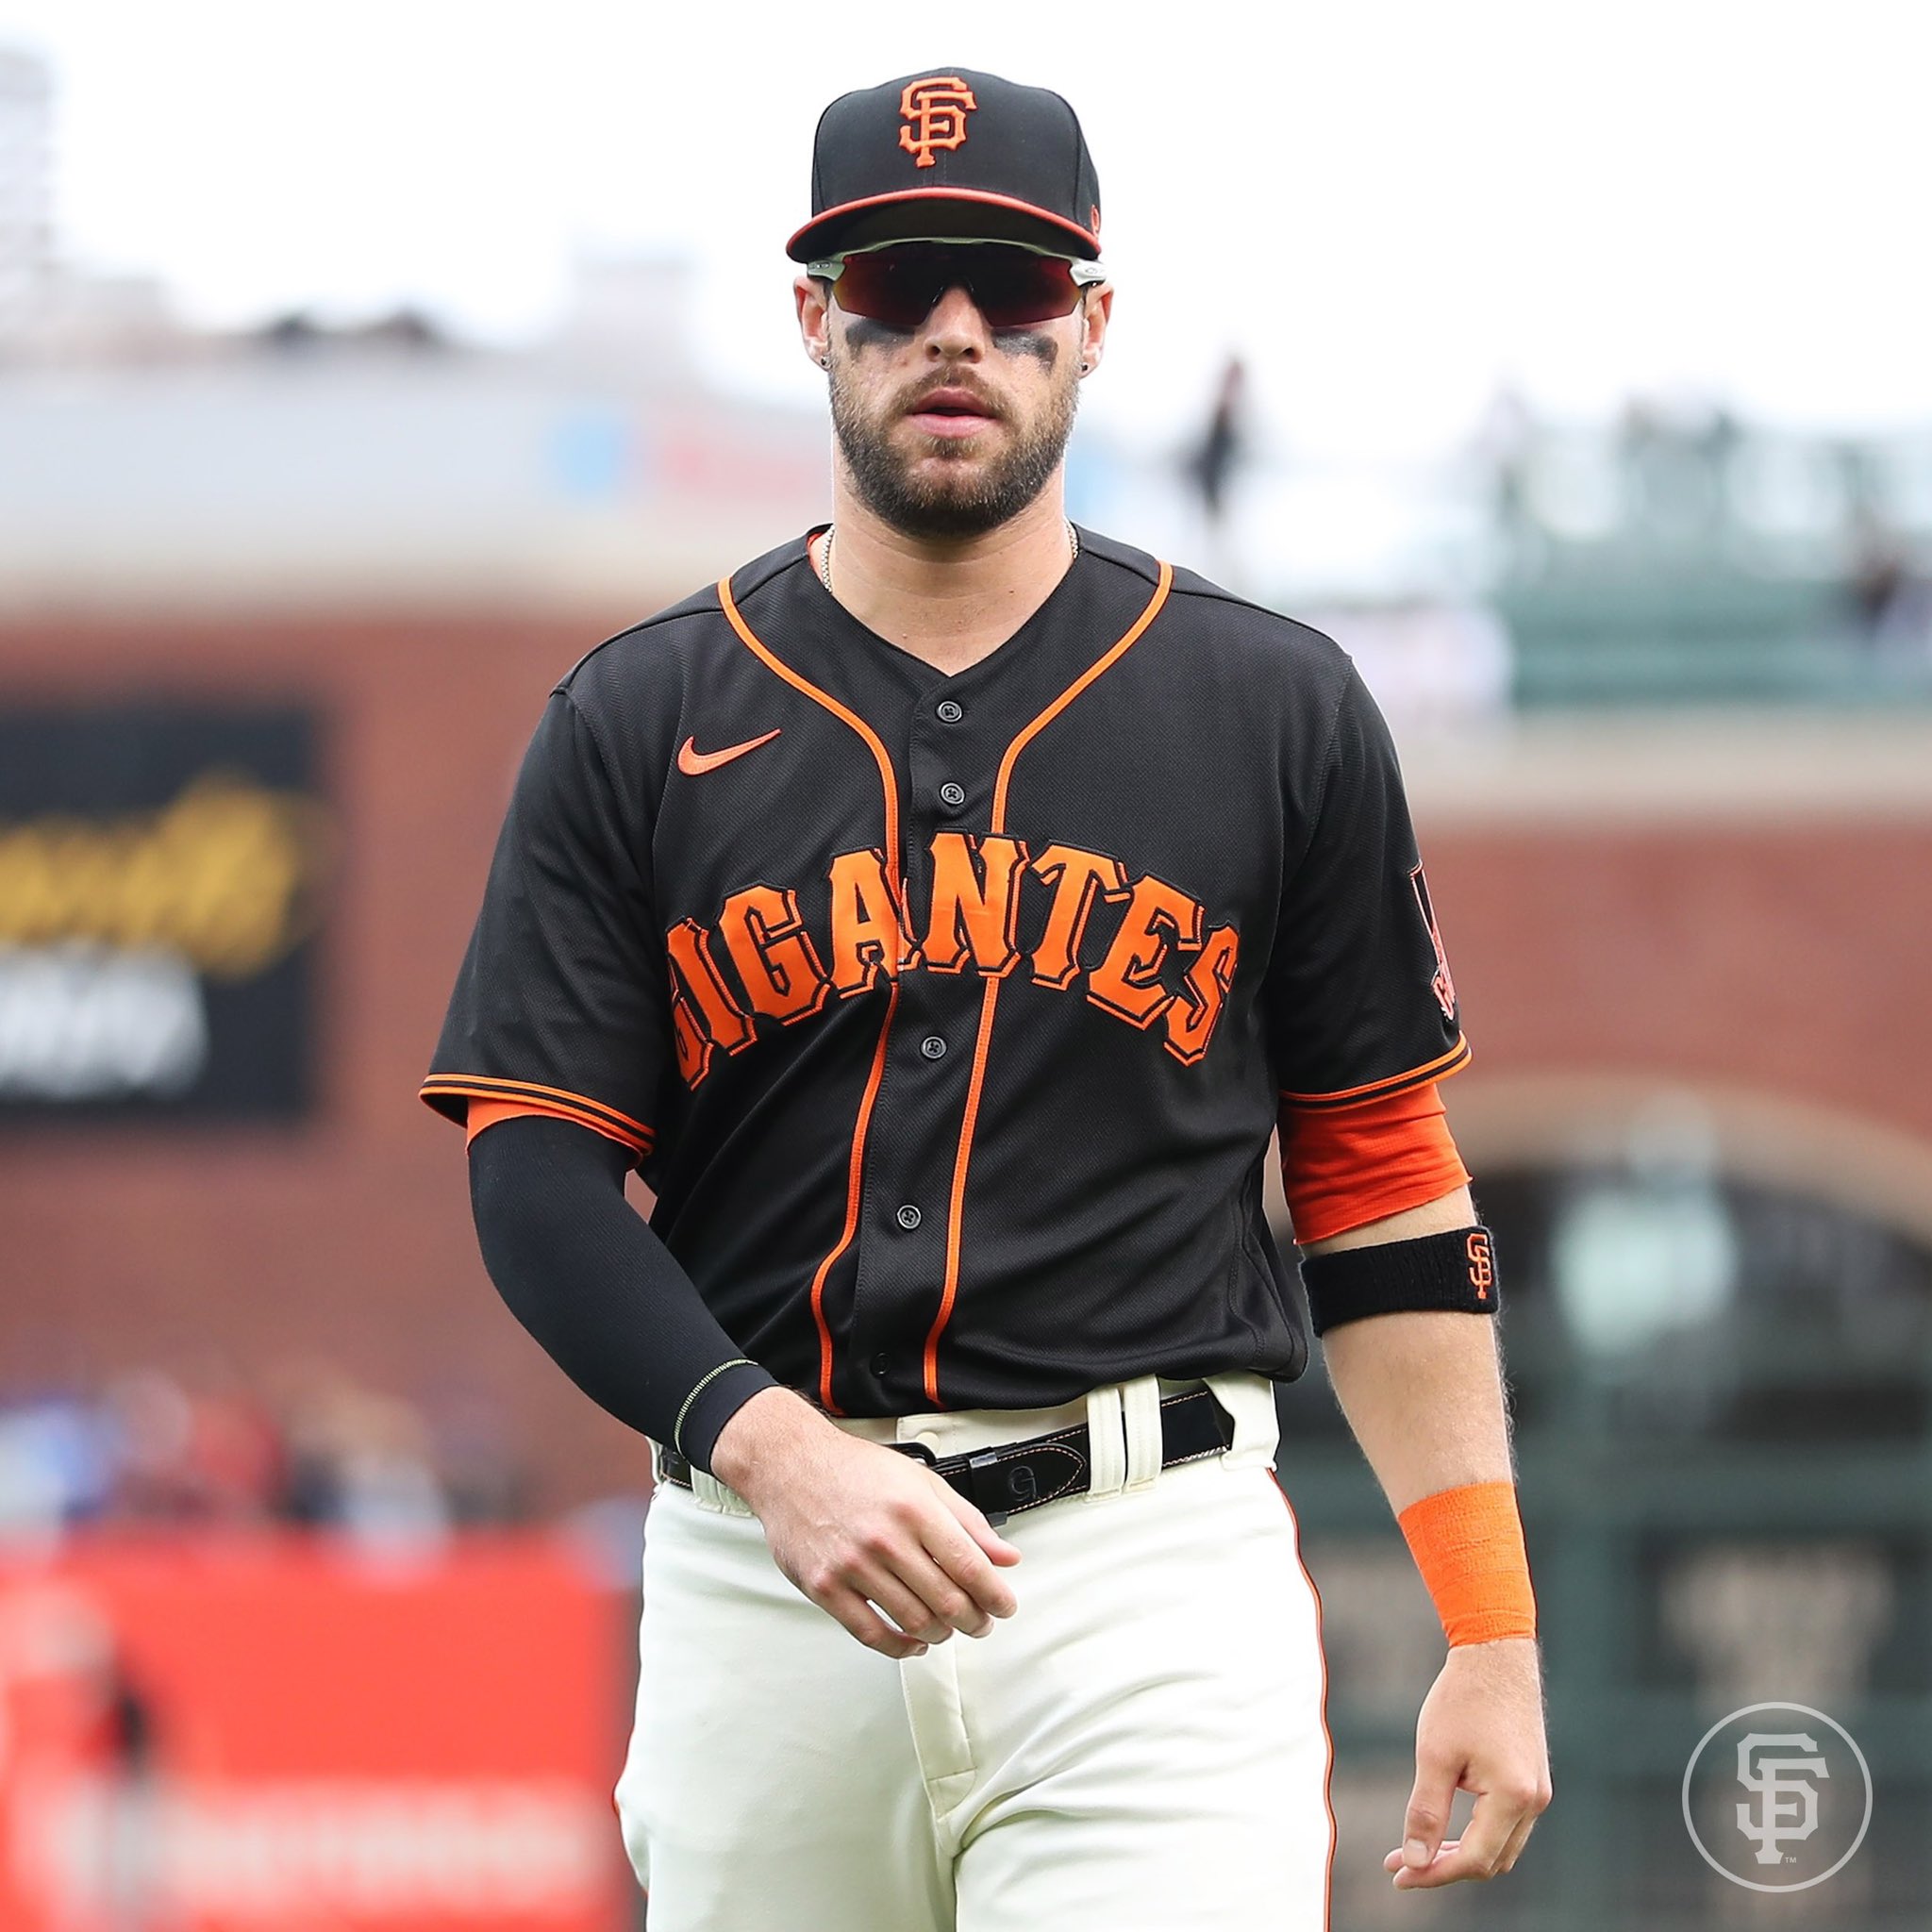 SFGiants on X: 'In honor of Fiesta Gigantes, the #SFGiants will wear  Gigantes jerseys for today's game. Throughout the game, the Giants will  celebrate Hispanic culture and elevate the work of local